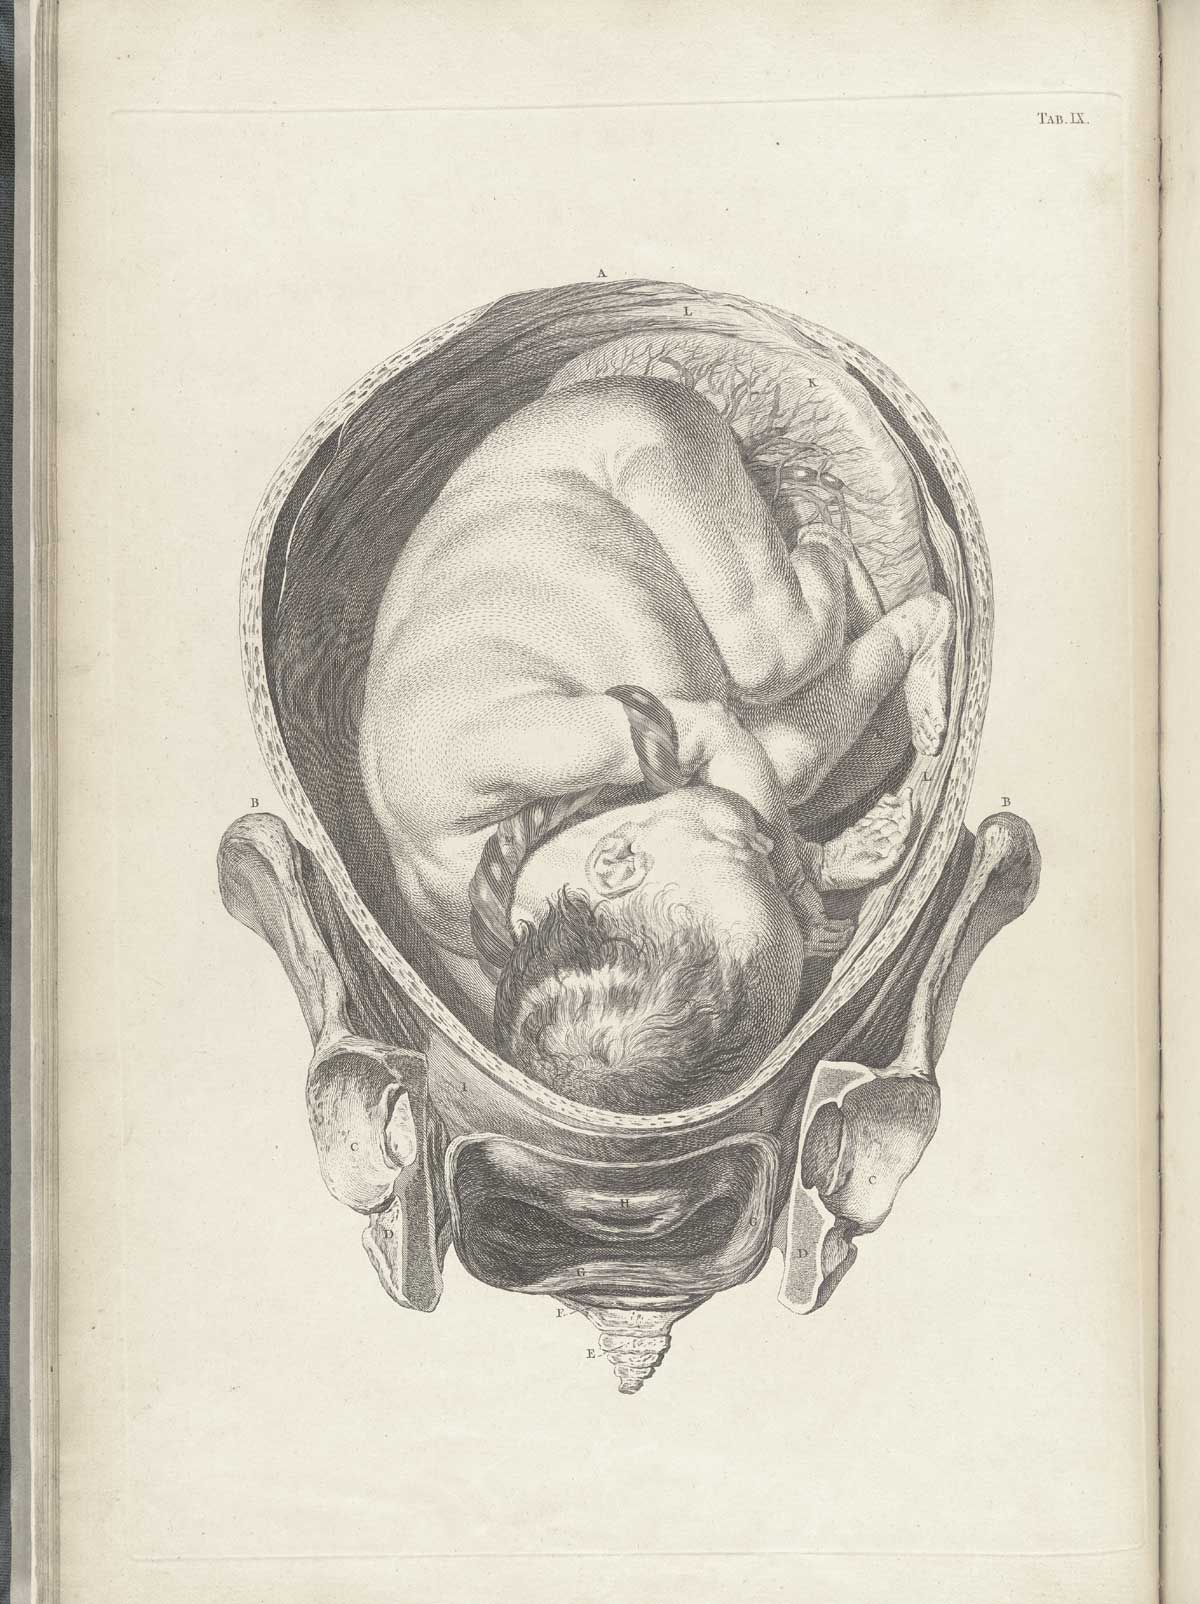 Table 9 of William Smellie's A sett of anatomical tables, with explanations, and an abridgment, of the practice of midwifery, featuring the illustrated drawing of a woman's pelvis and uterus with a fetus.